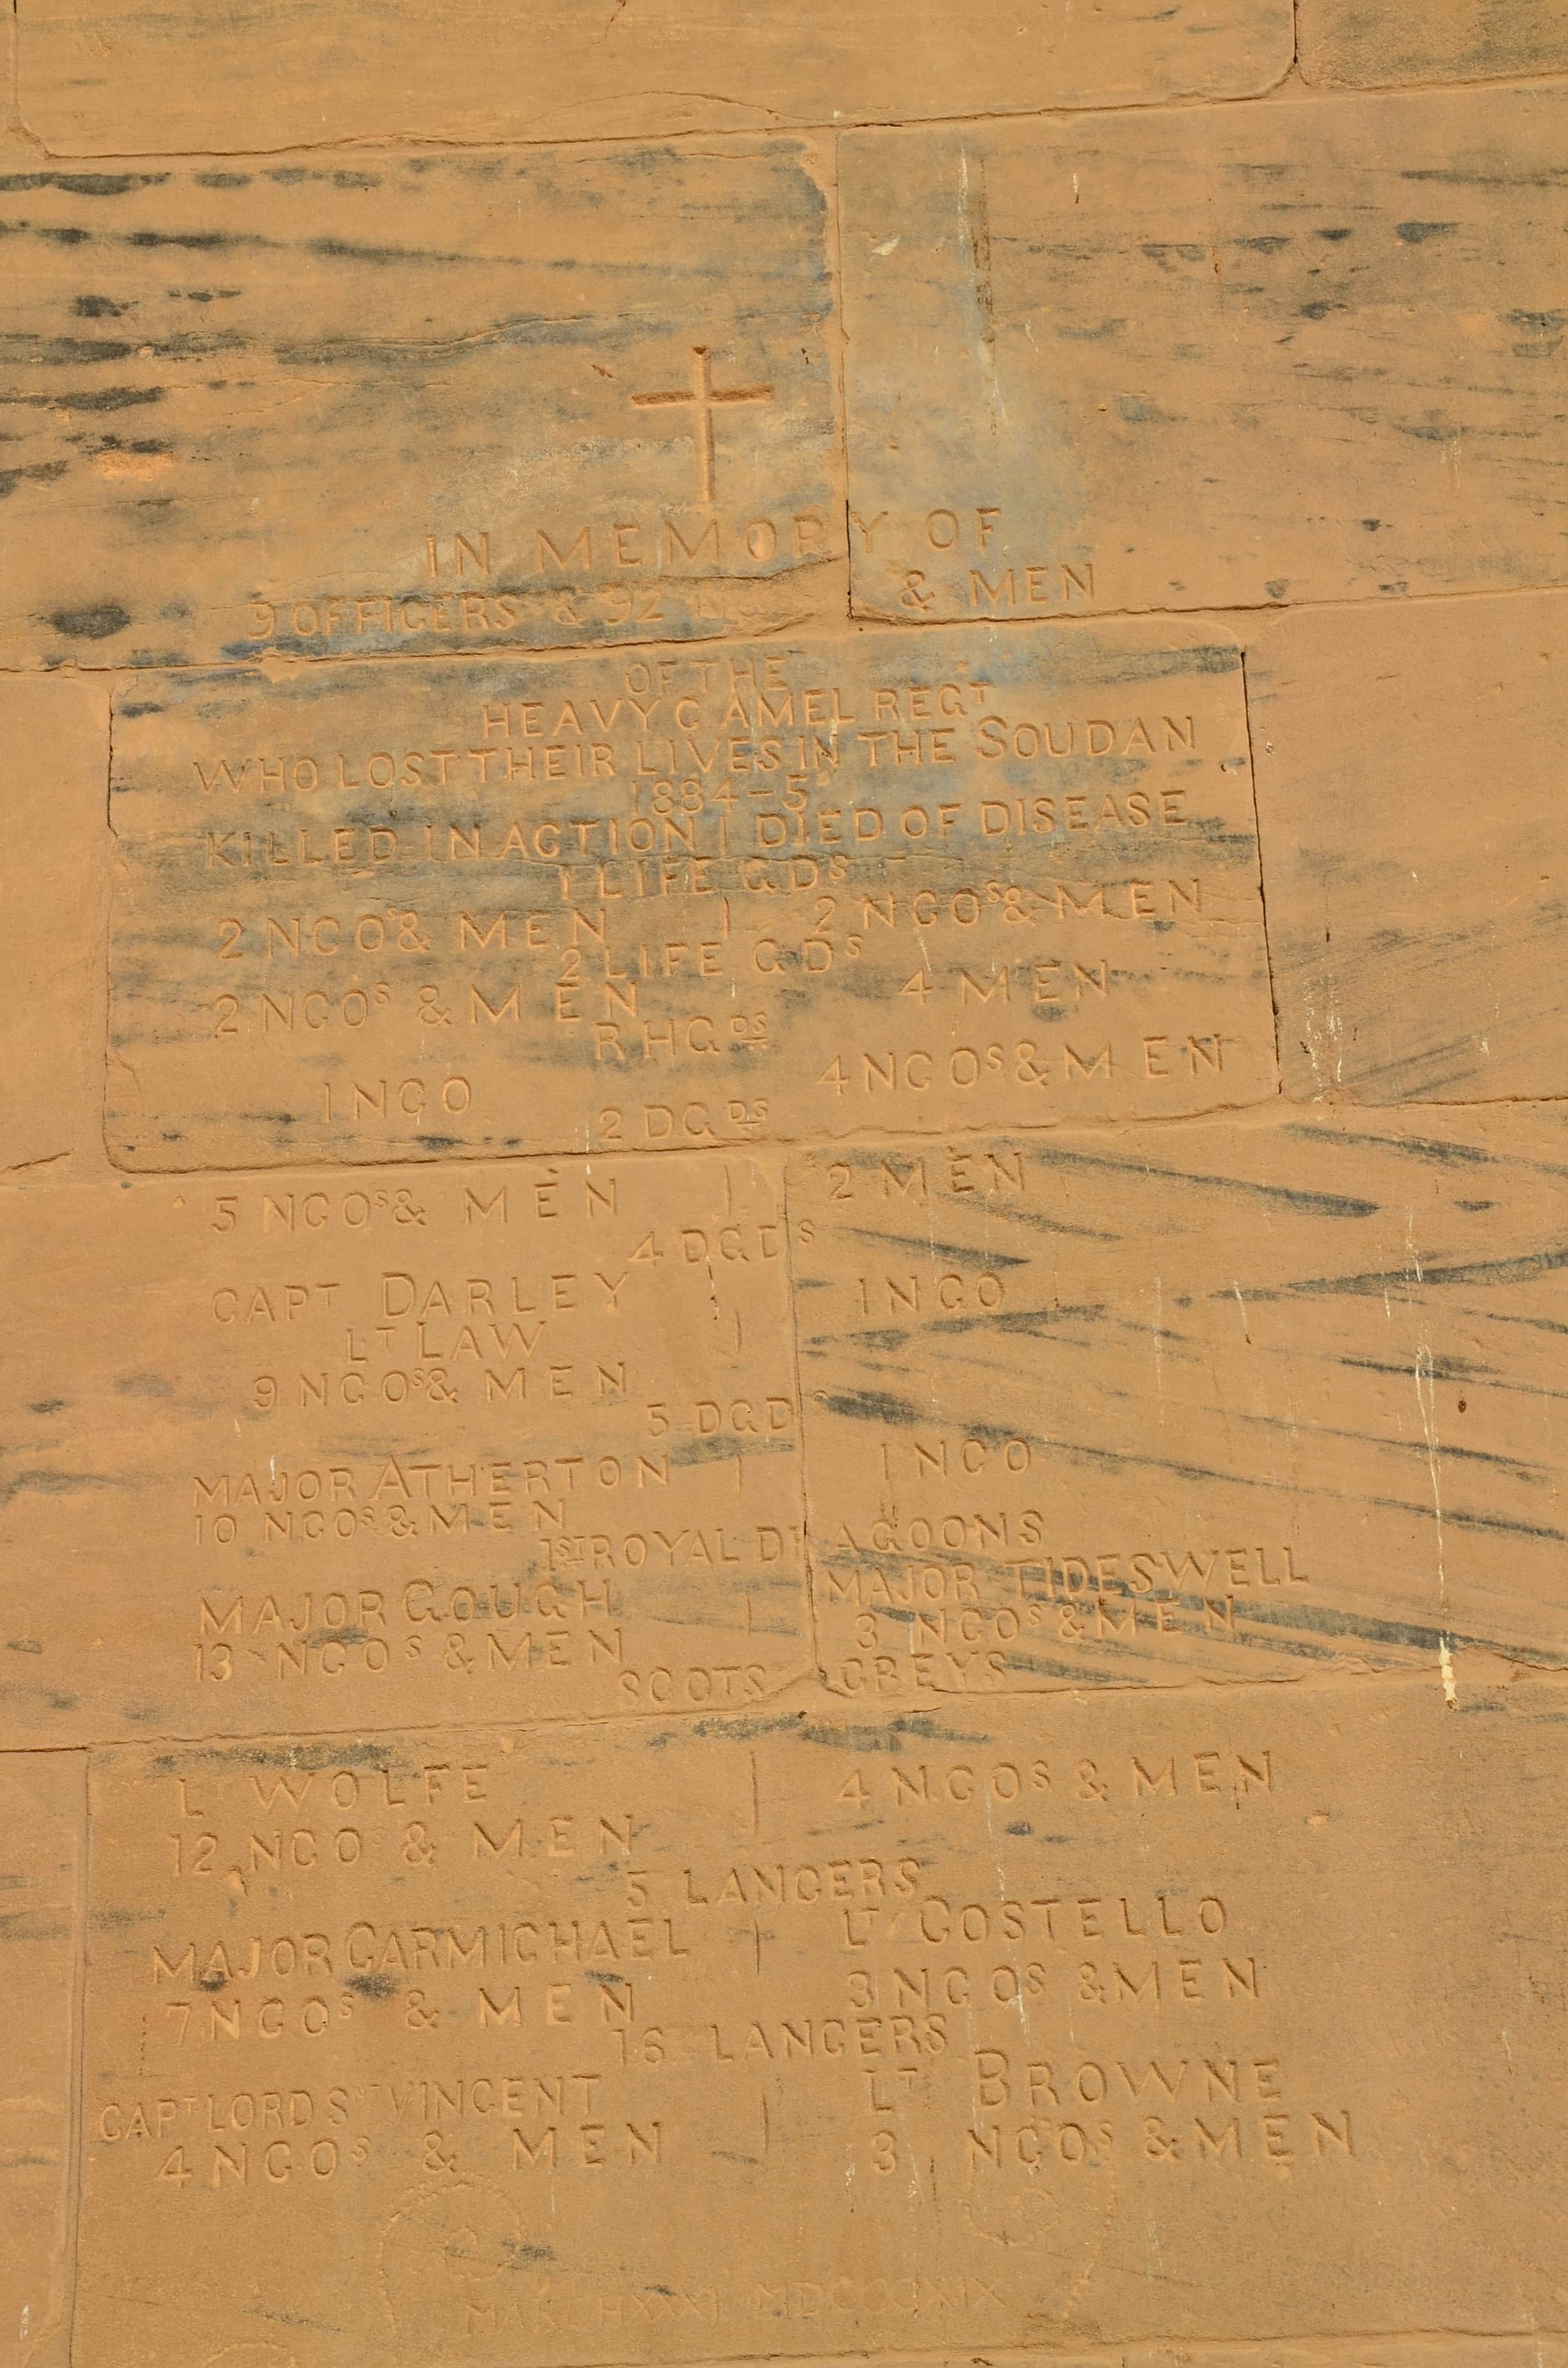 British memorial to soldiers killed in Sudan in 1884-85 at Philae Temple on Agilkia Island in Egypt